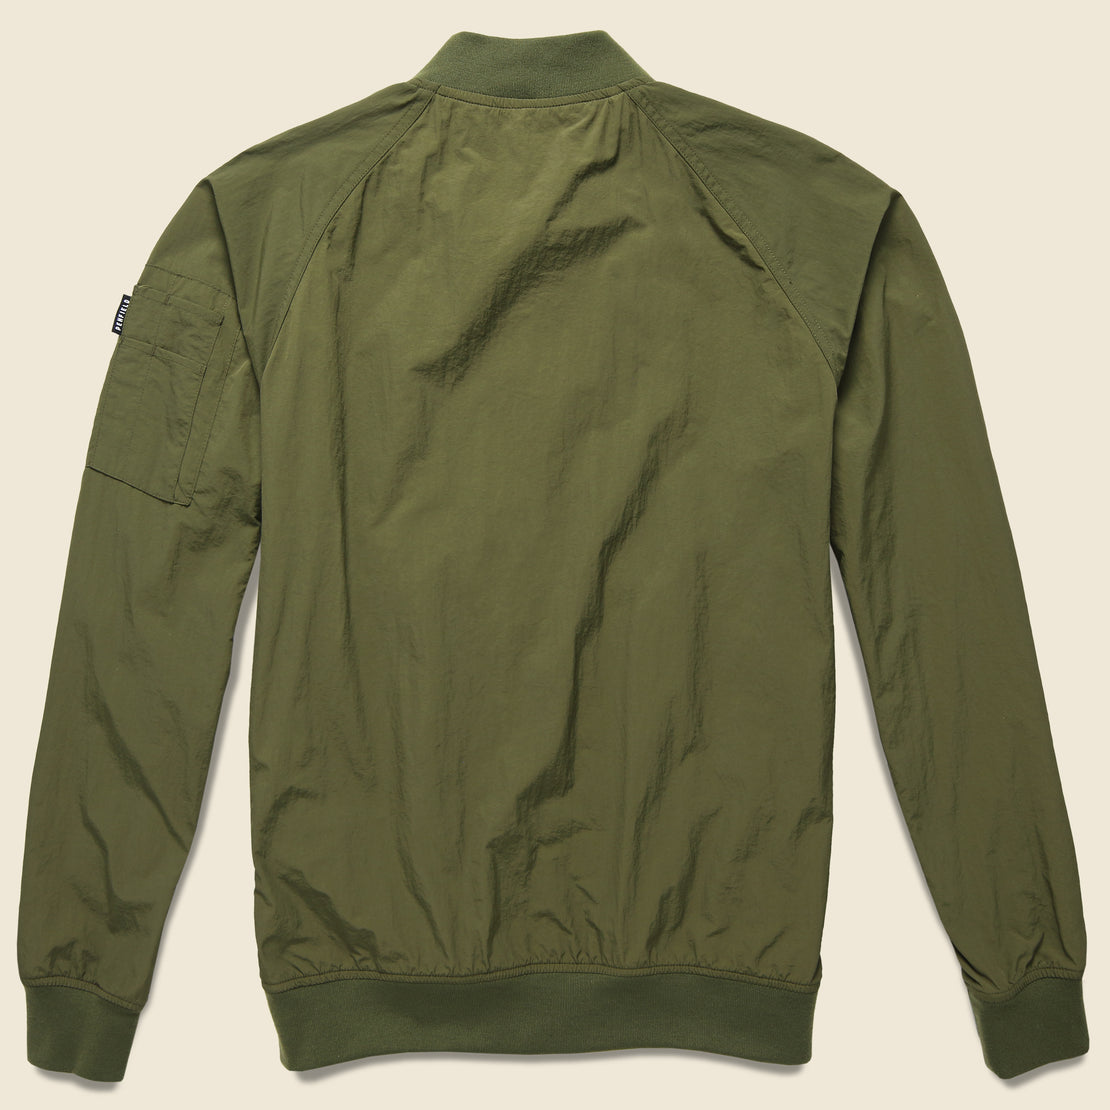 Okenfield Jacket - Olive - Penfield - STAG Provisions - Outerwear - Coat / Jacket